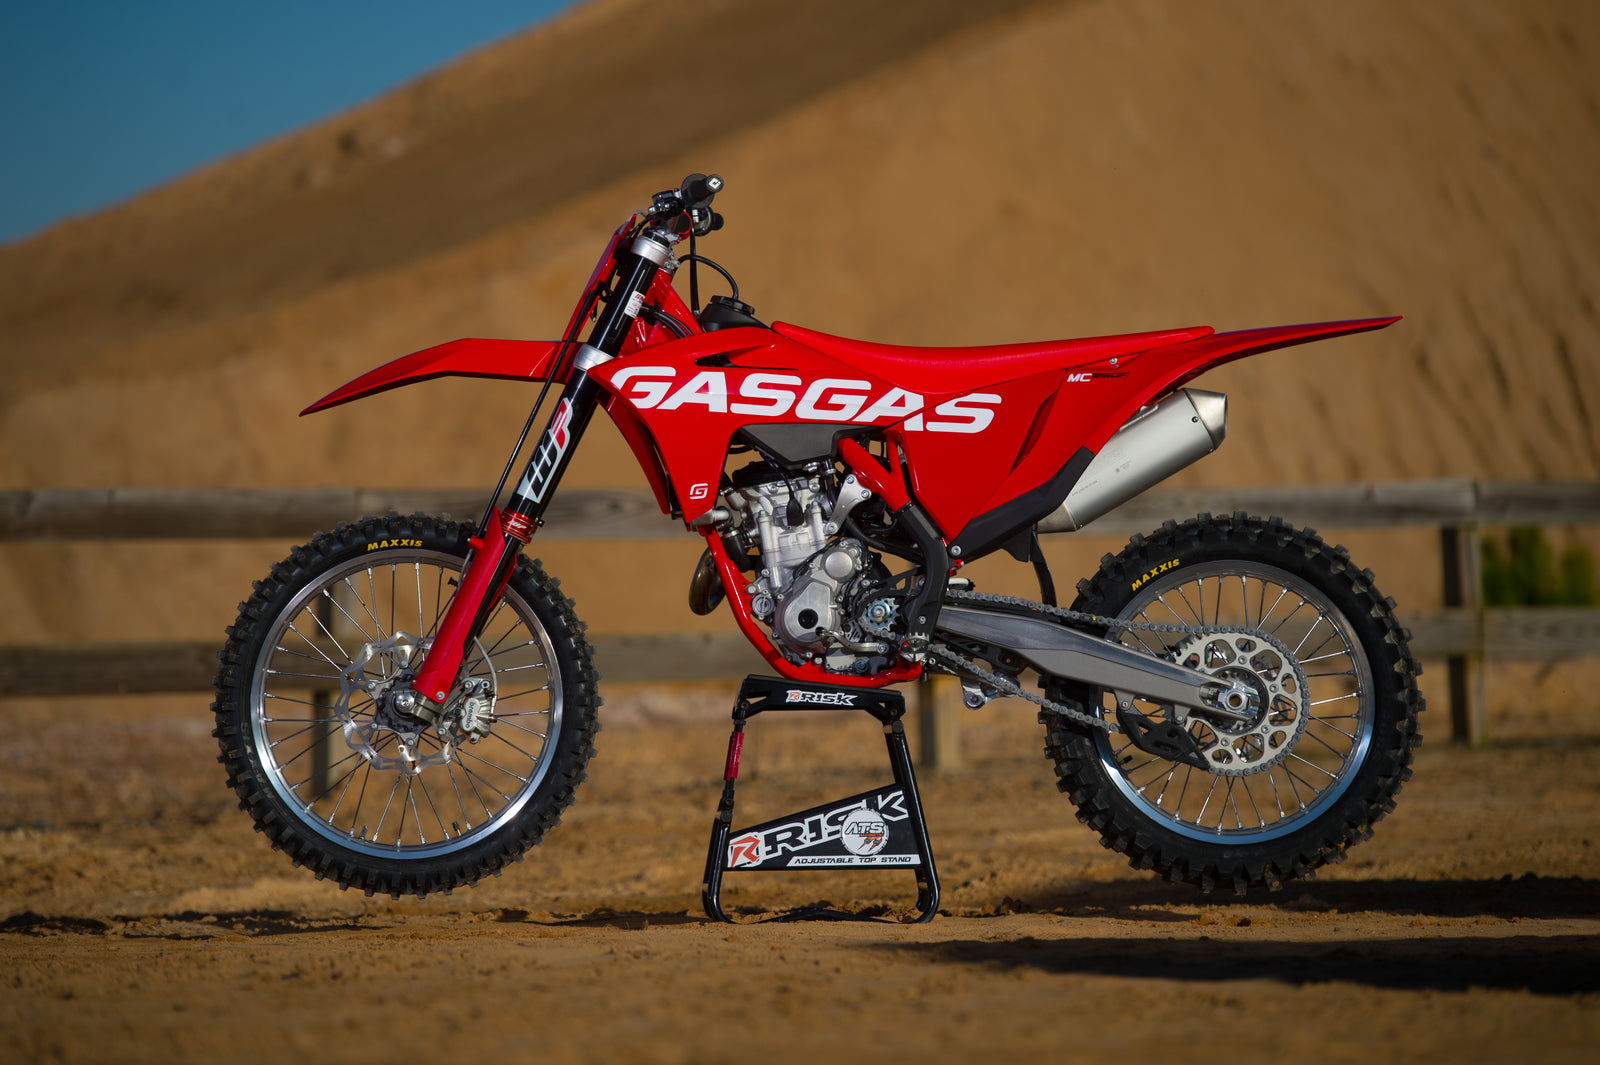 How do I Know if My Dirt Bike Needs a New Bottom End? - Risk Racing